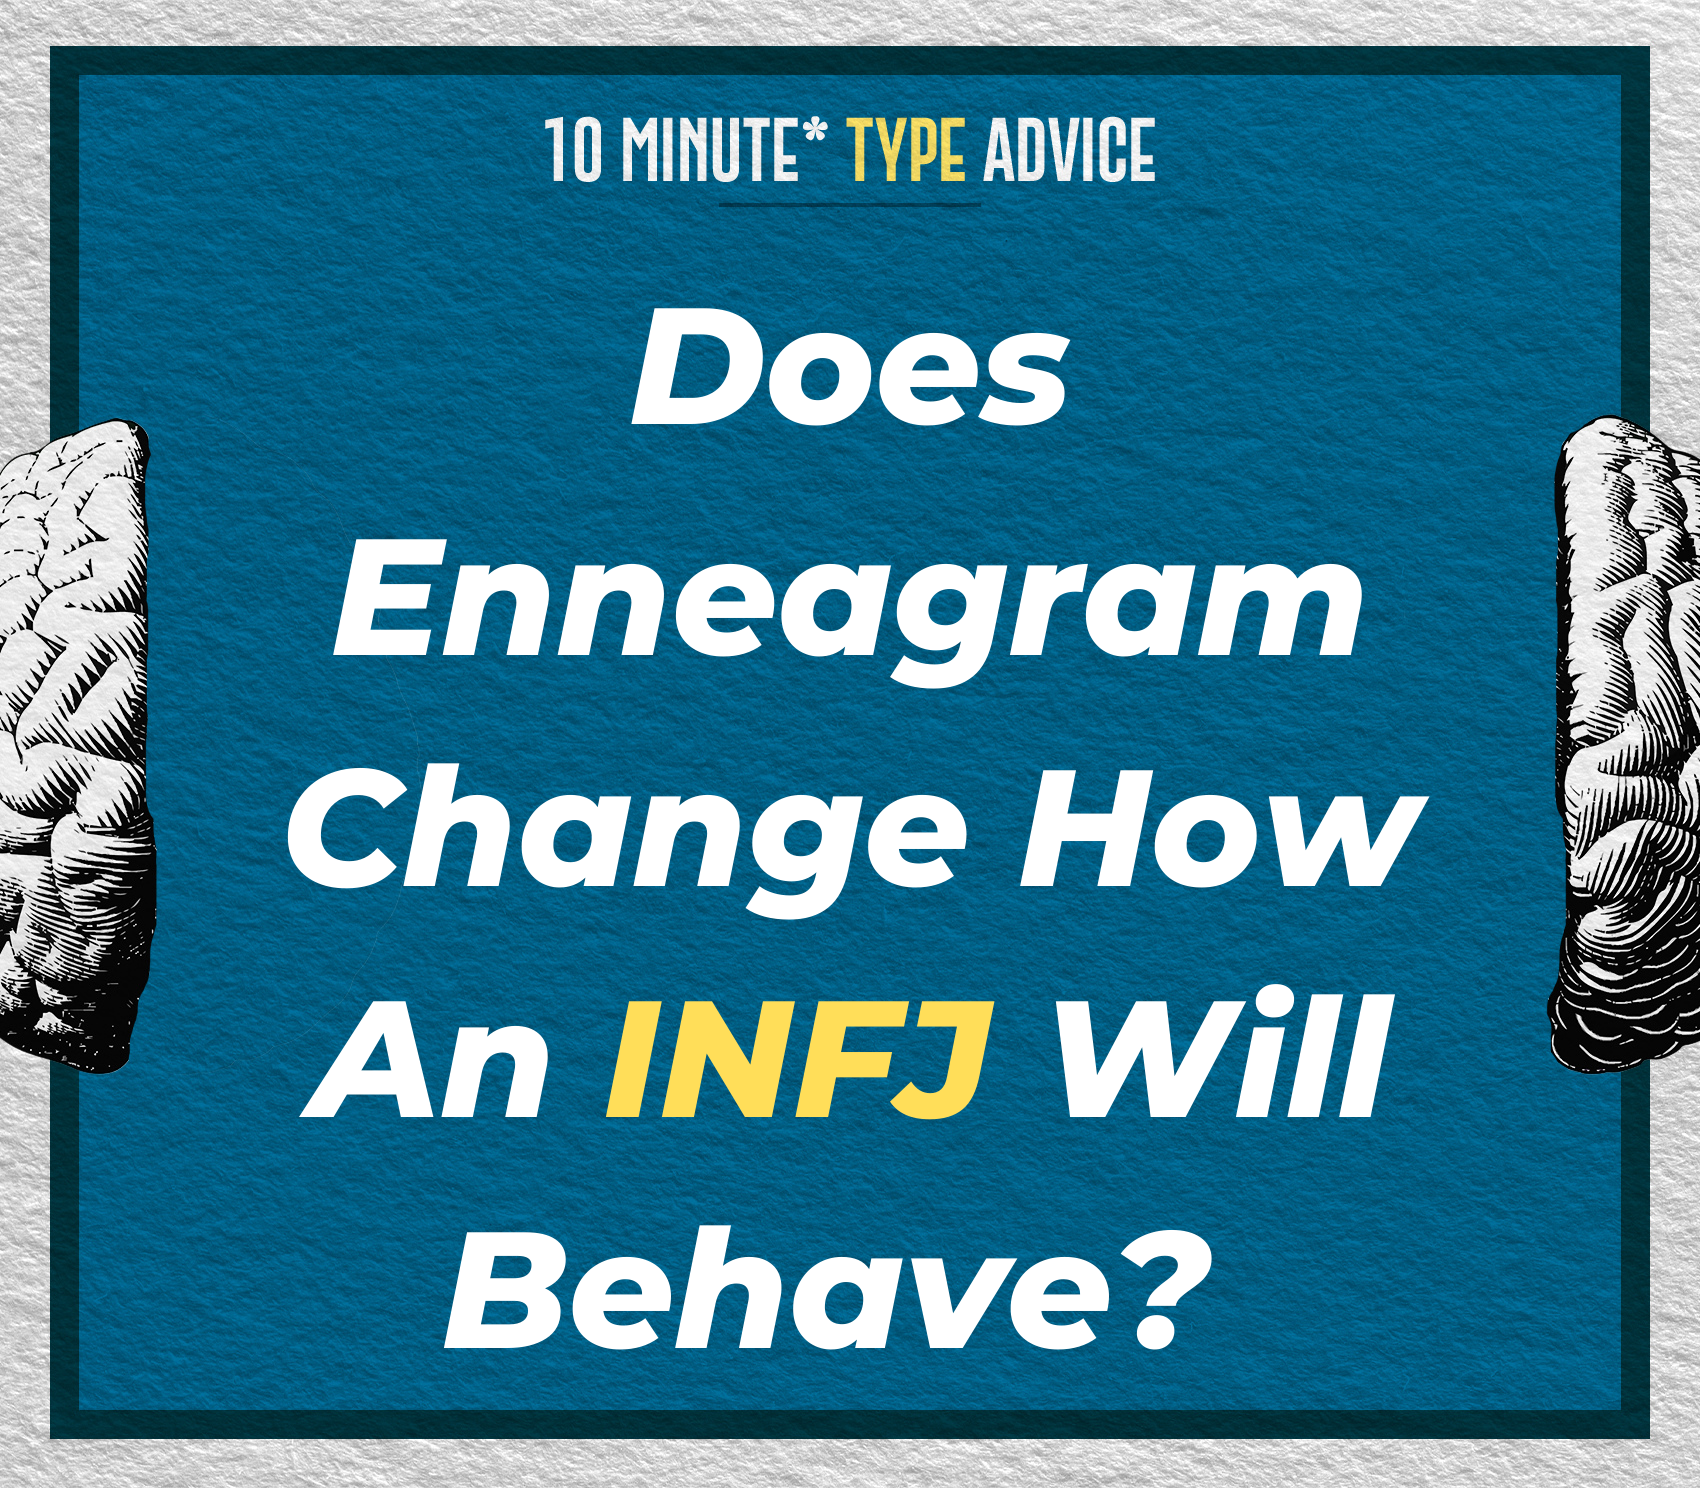 Does Enneagram Type Change How An INFJ Will Behave? | 10 Min Type Advice | S01:E12